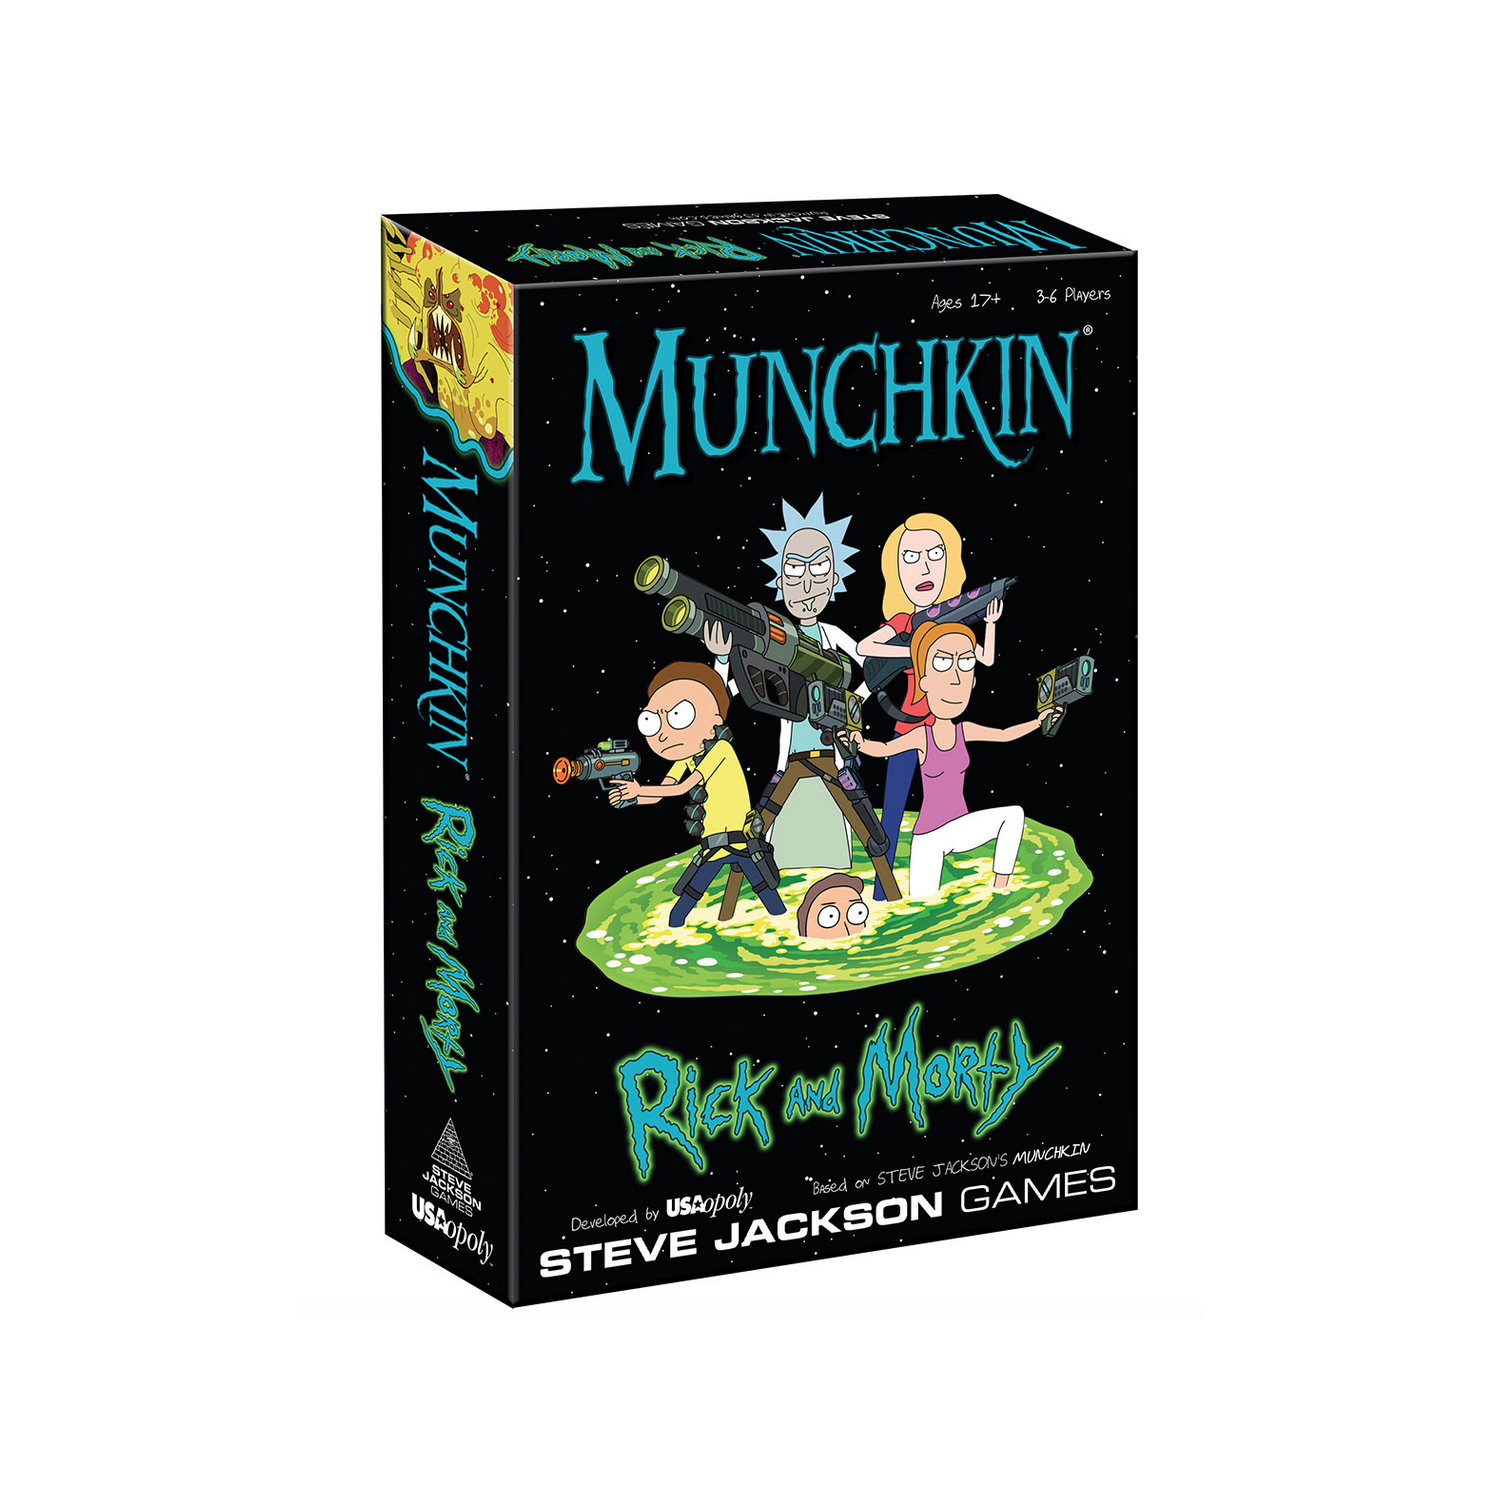 Genuine Munchkin Rick and Morty Edition Brand New & Sealed Steve Jackson Games 